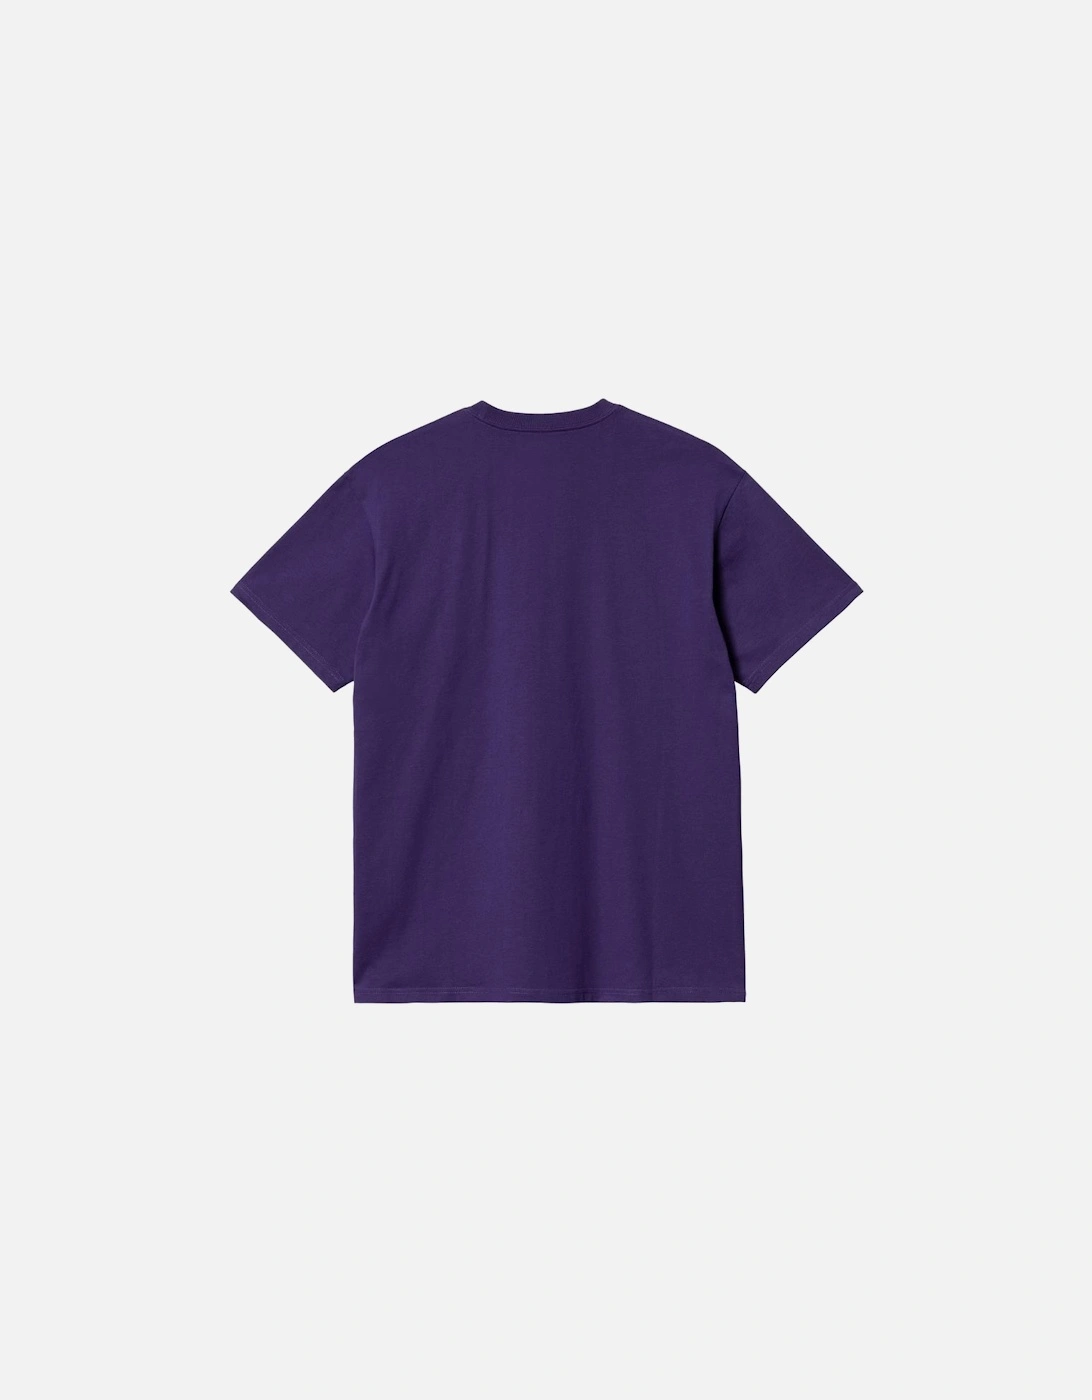 S/S Chase T-Shirt - Tyrian